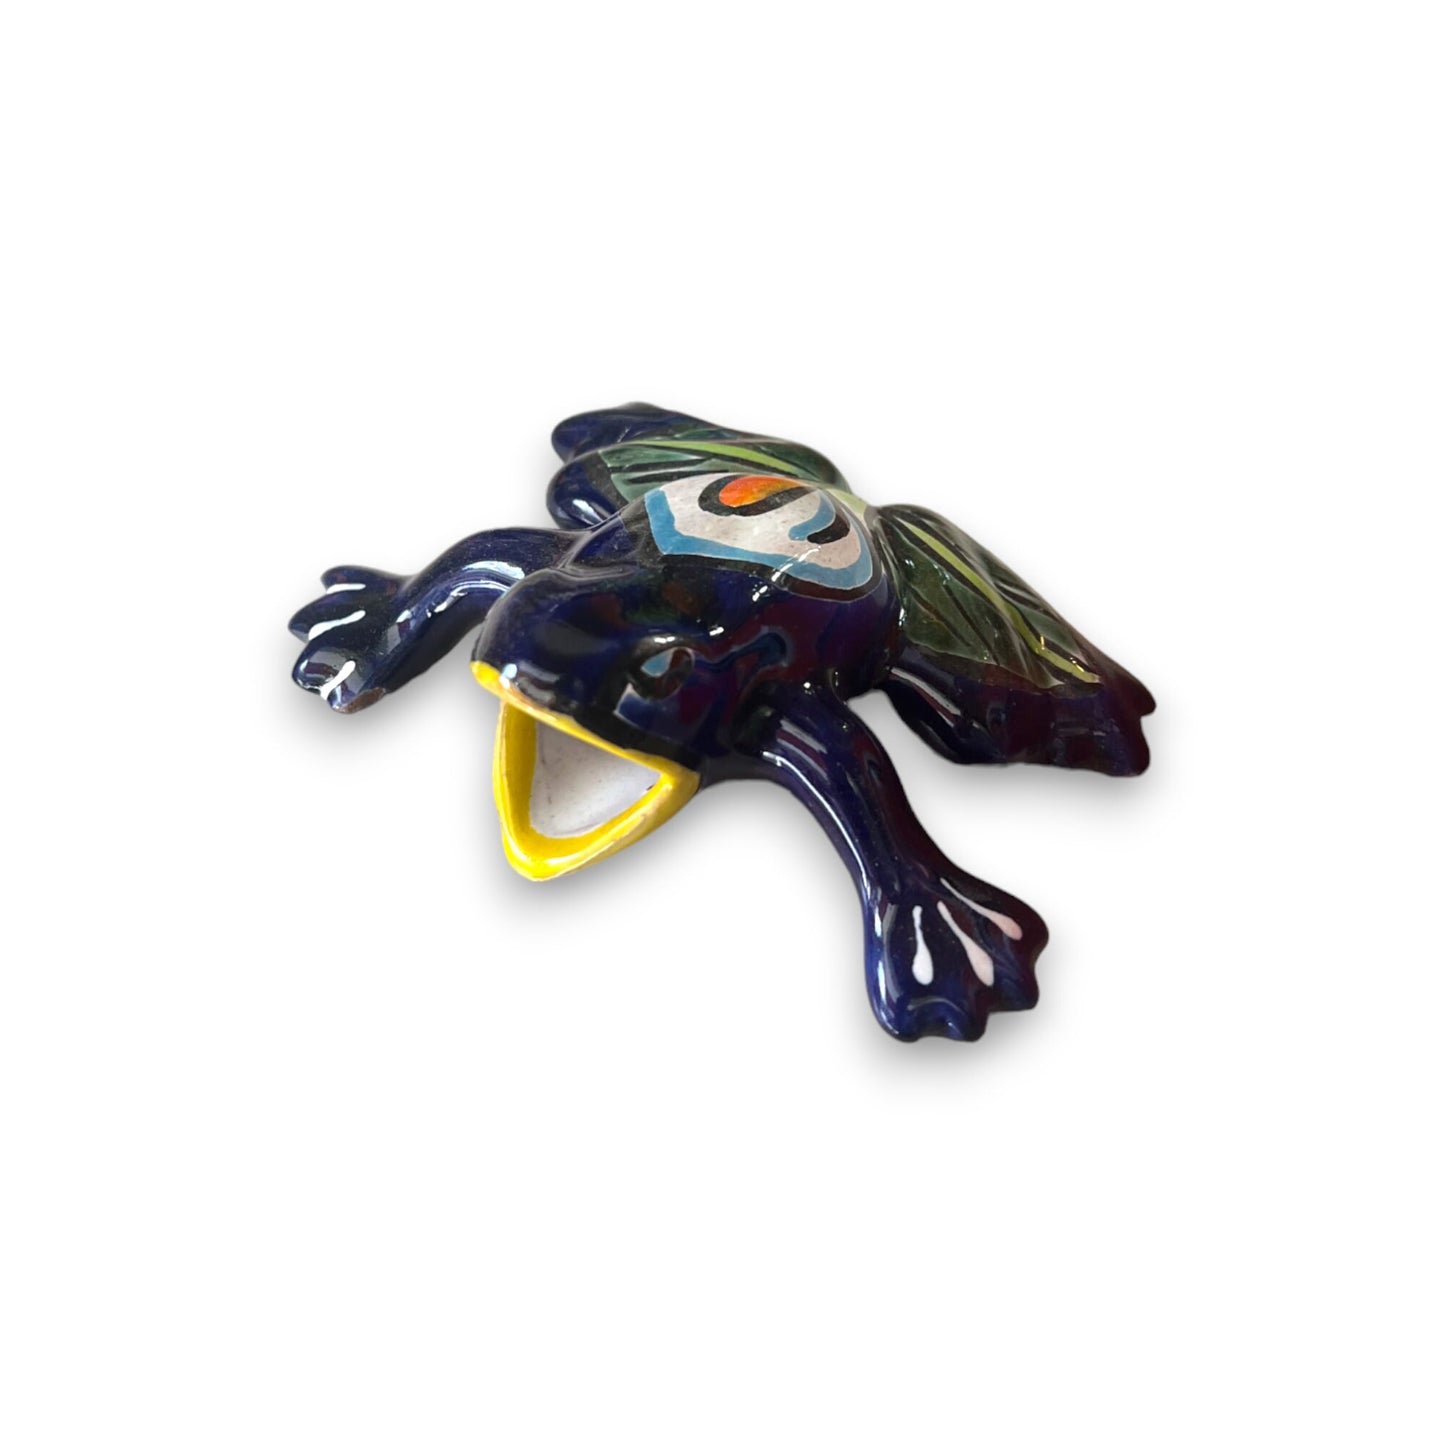 Colorful Handmade Talavera Frog Figurine | Mexican Hand-Painted Decor (Small Size)